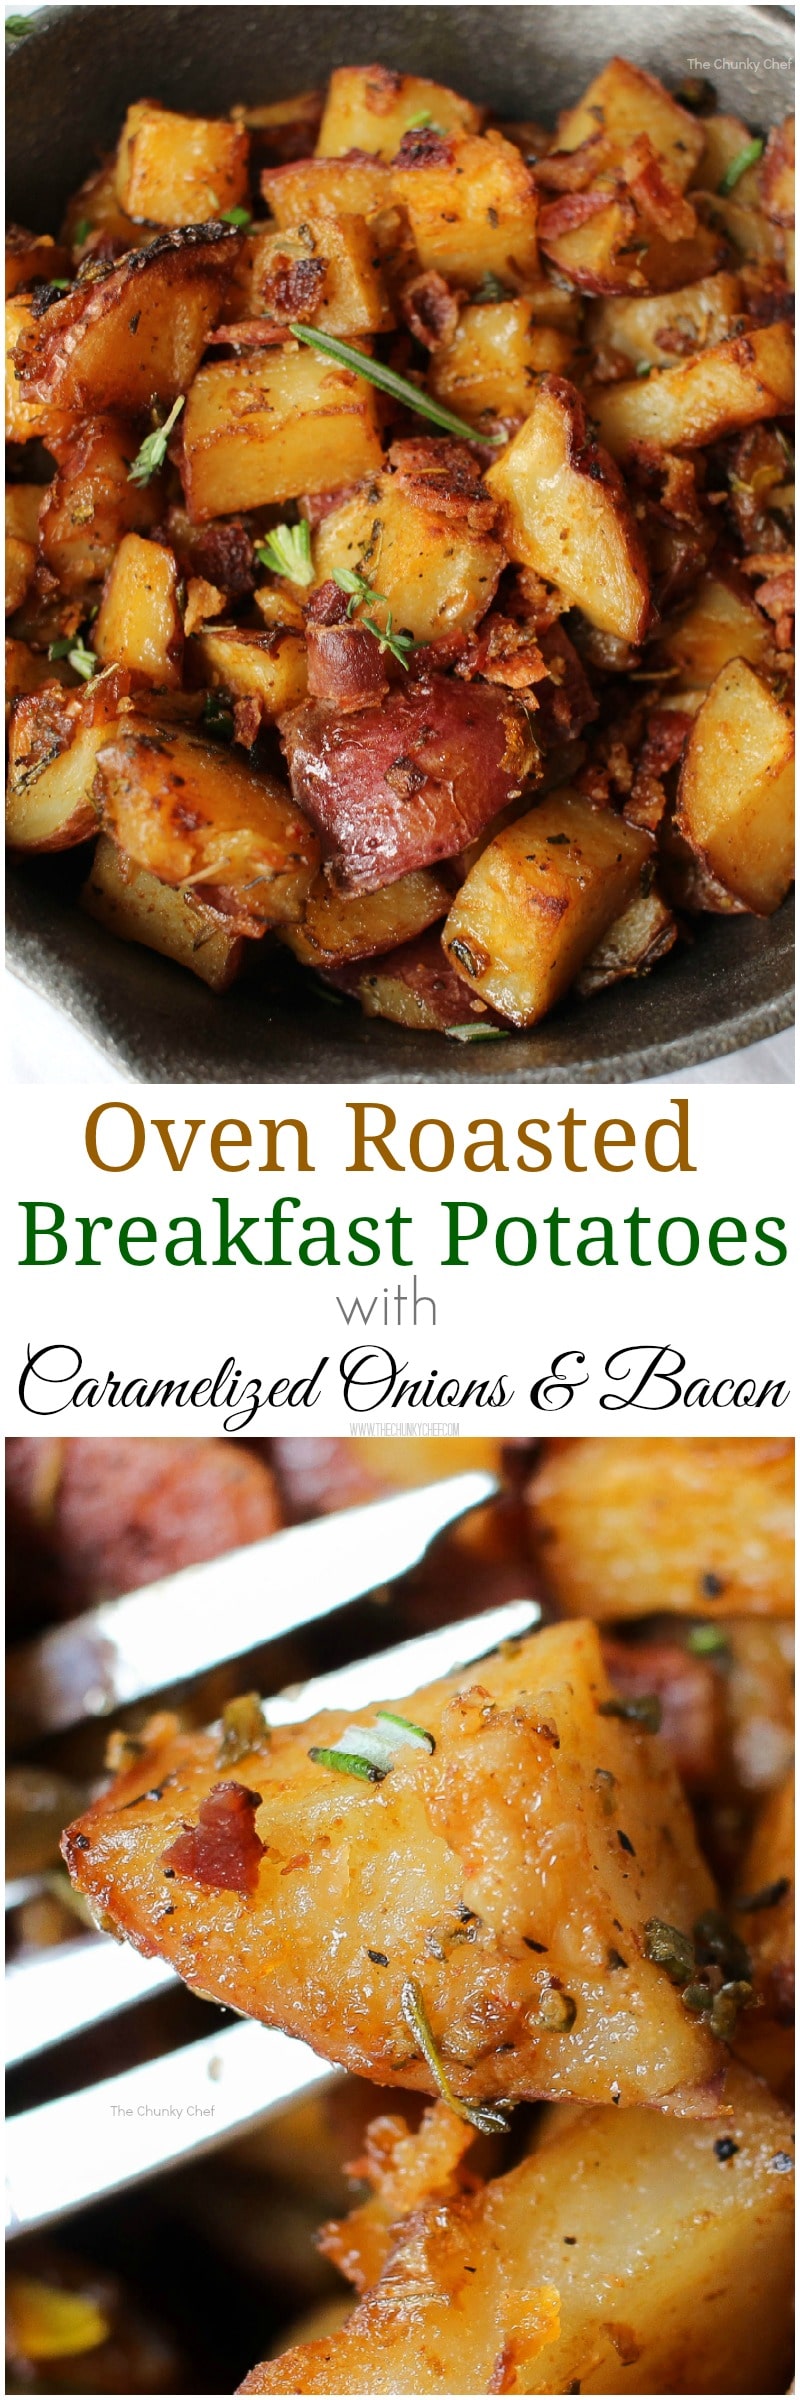 Perfectly seasoned and roasted red-skin potatoes topped with caramelized onions, crispy bacon and fresh herbs. The perfect side dish for breakfast!